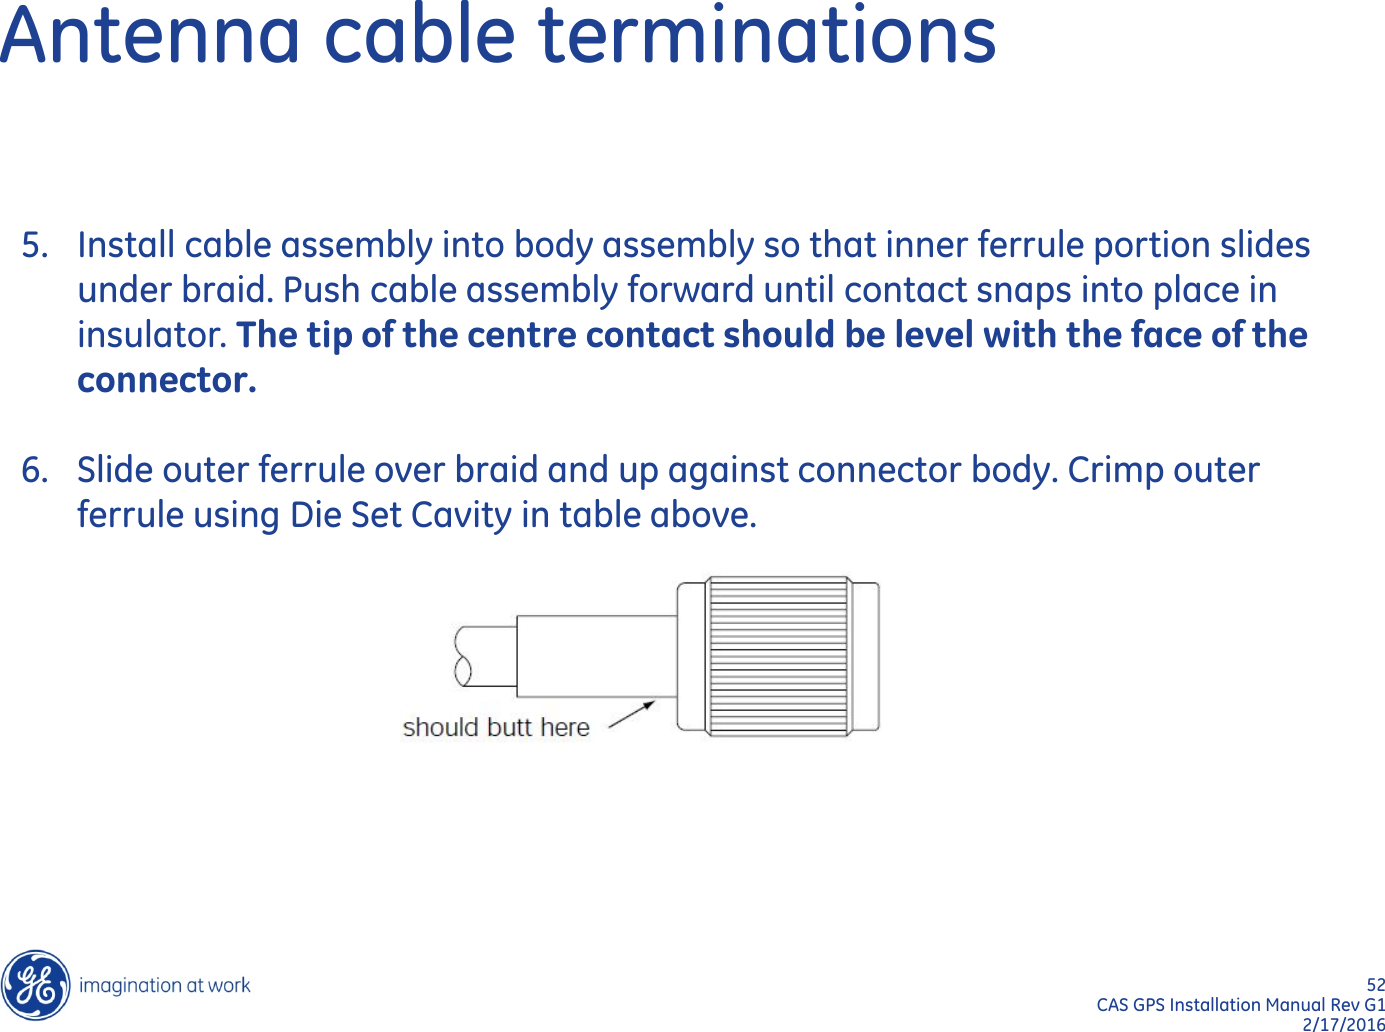 52  CAS GPS Installation Manual Rev G1 2/17/2016 Antenna cable terminations 5. Install cable assembly into body assembly so that inner ferrule portion slides under braid. Push cable assembly forward until contact snaps into place in insulator. The tip of the centre contact should be level with the face of the connector.  6. Slide outer ferrule over braid and up against connector body. Crimp outer ferrule using Die Set Cavity in table above. 